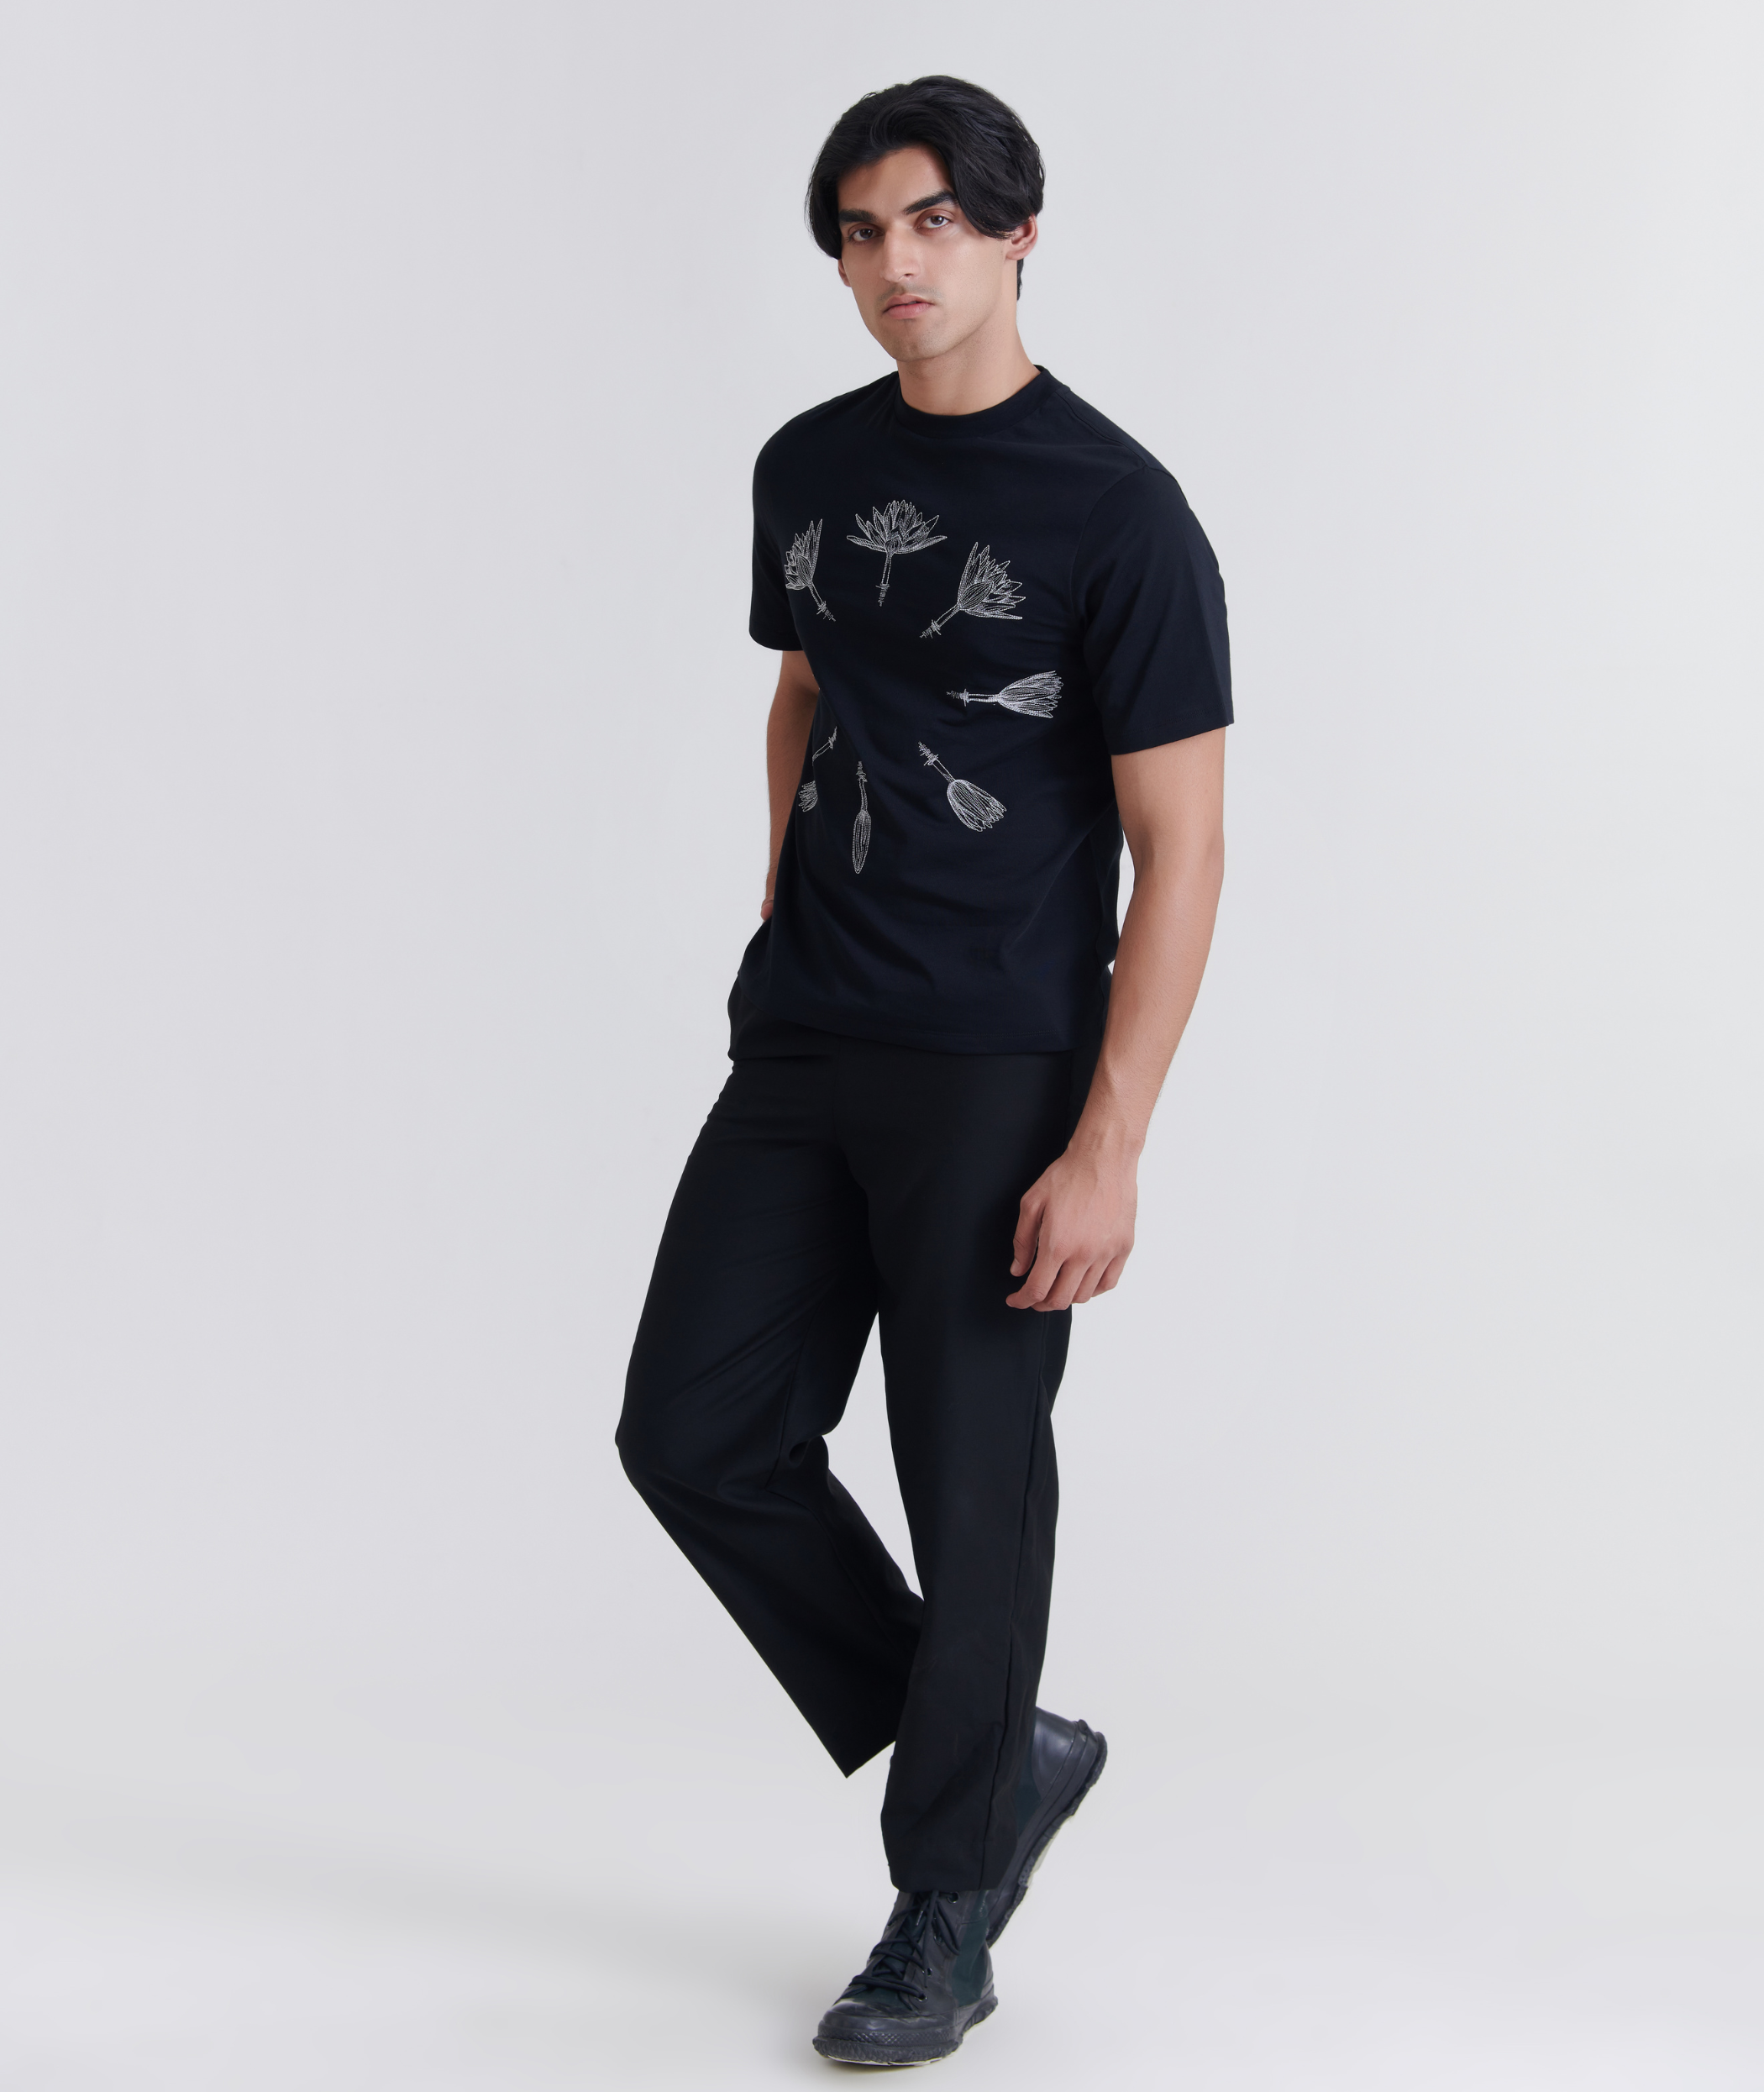 Axel Lily T-Shrit